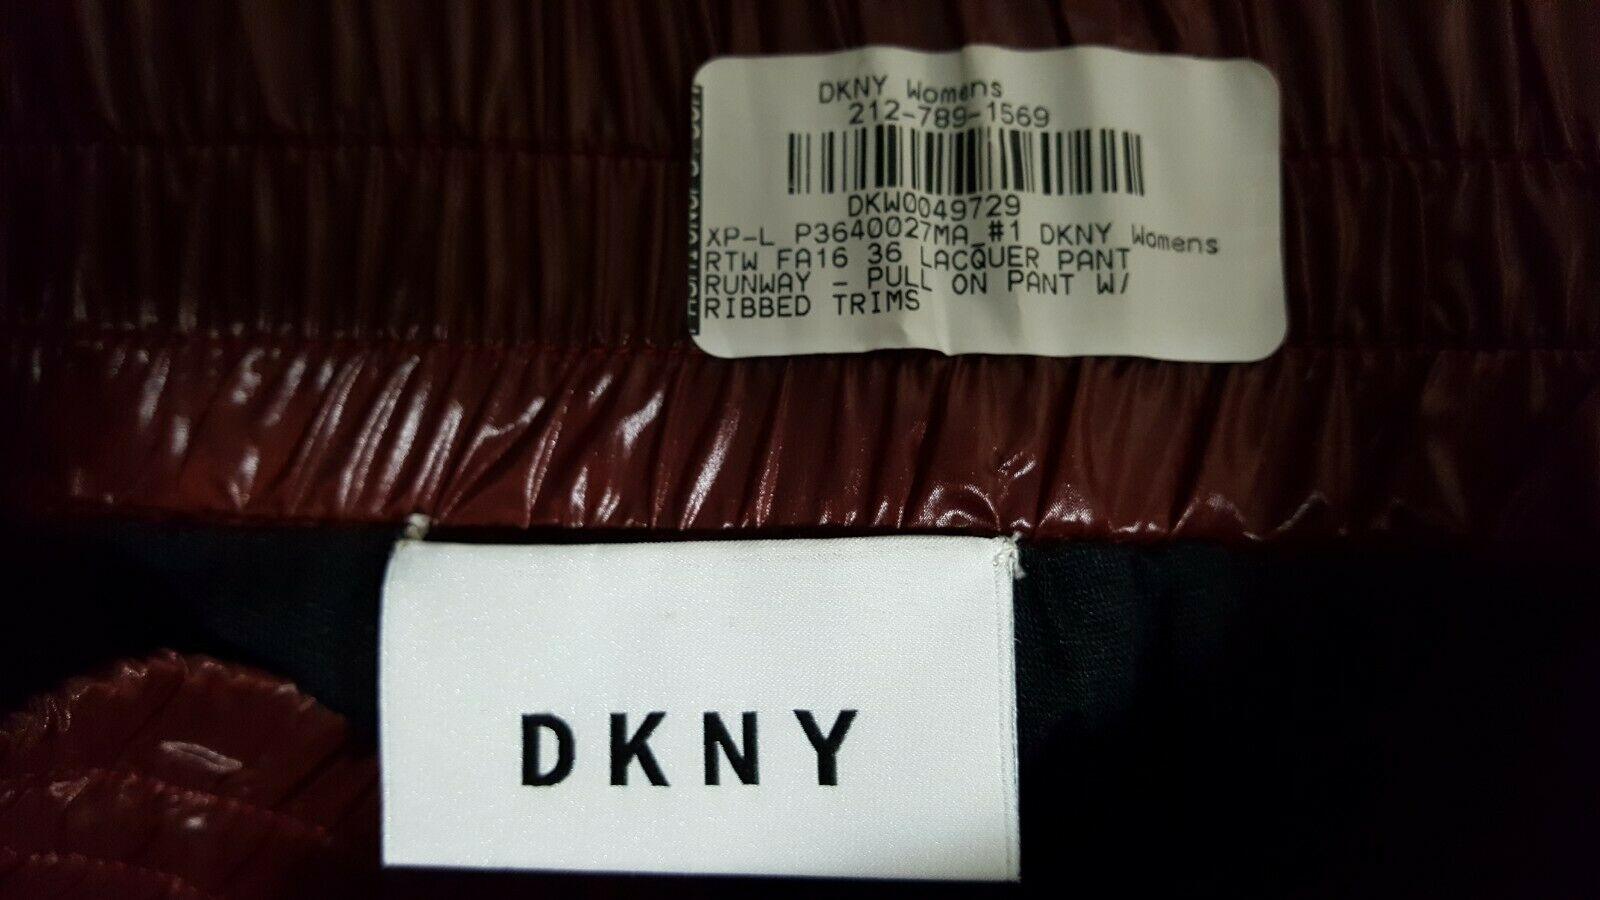 DKNY Womens Lacquer Lined Pant Runway Ribbed Trims Size L - SVNYFancy